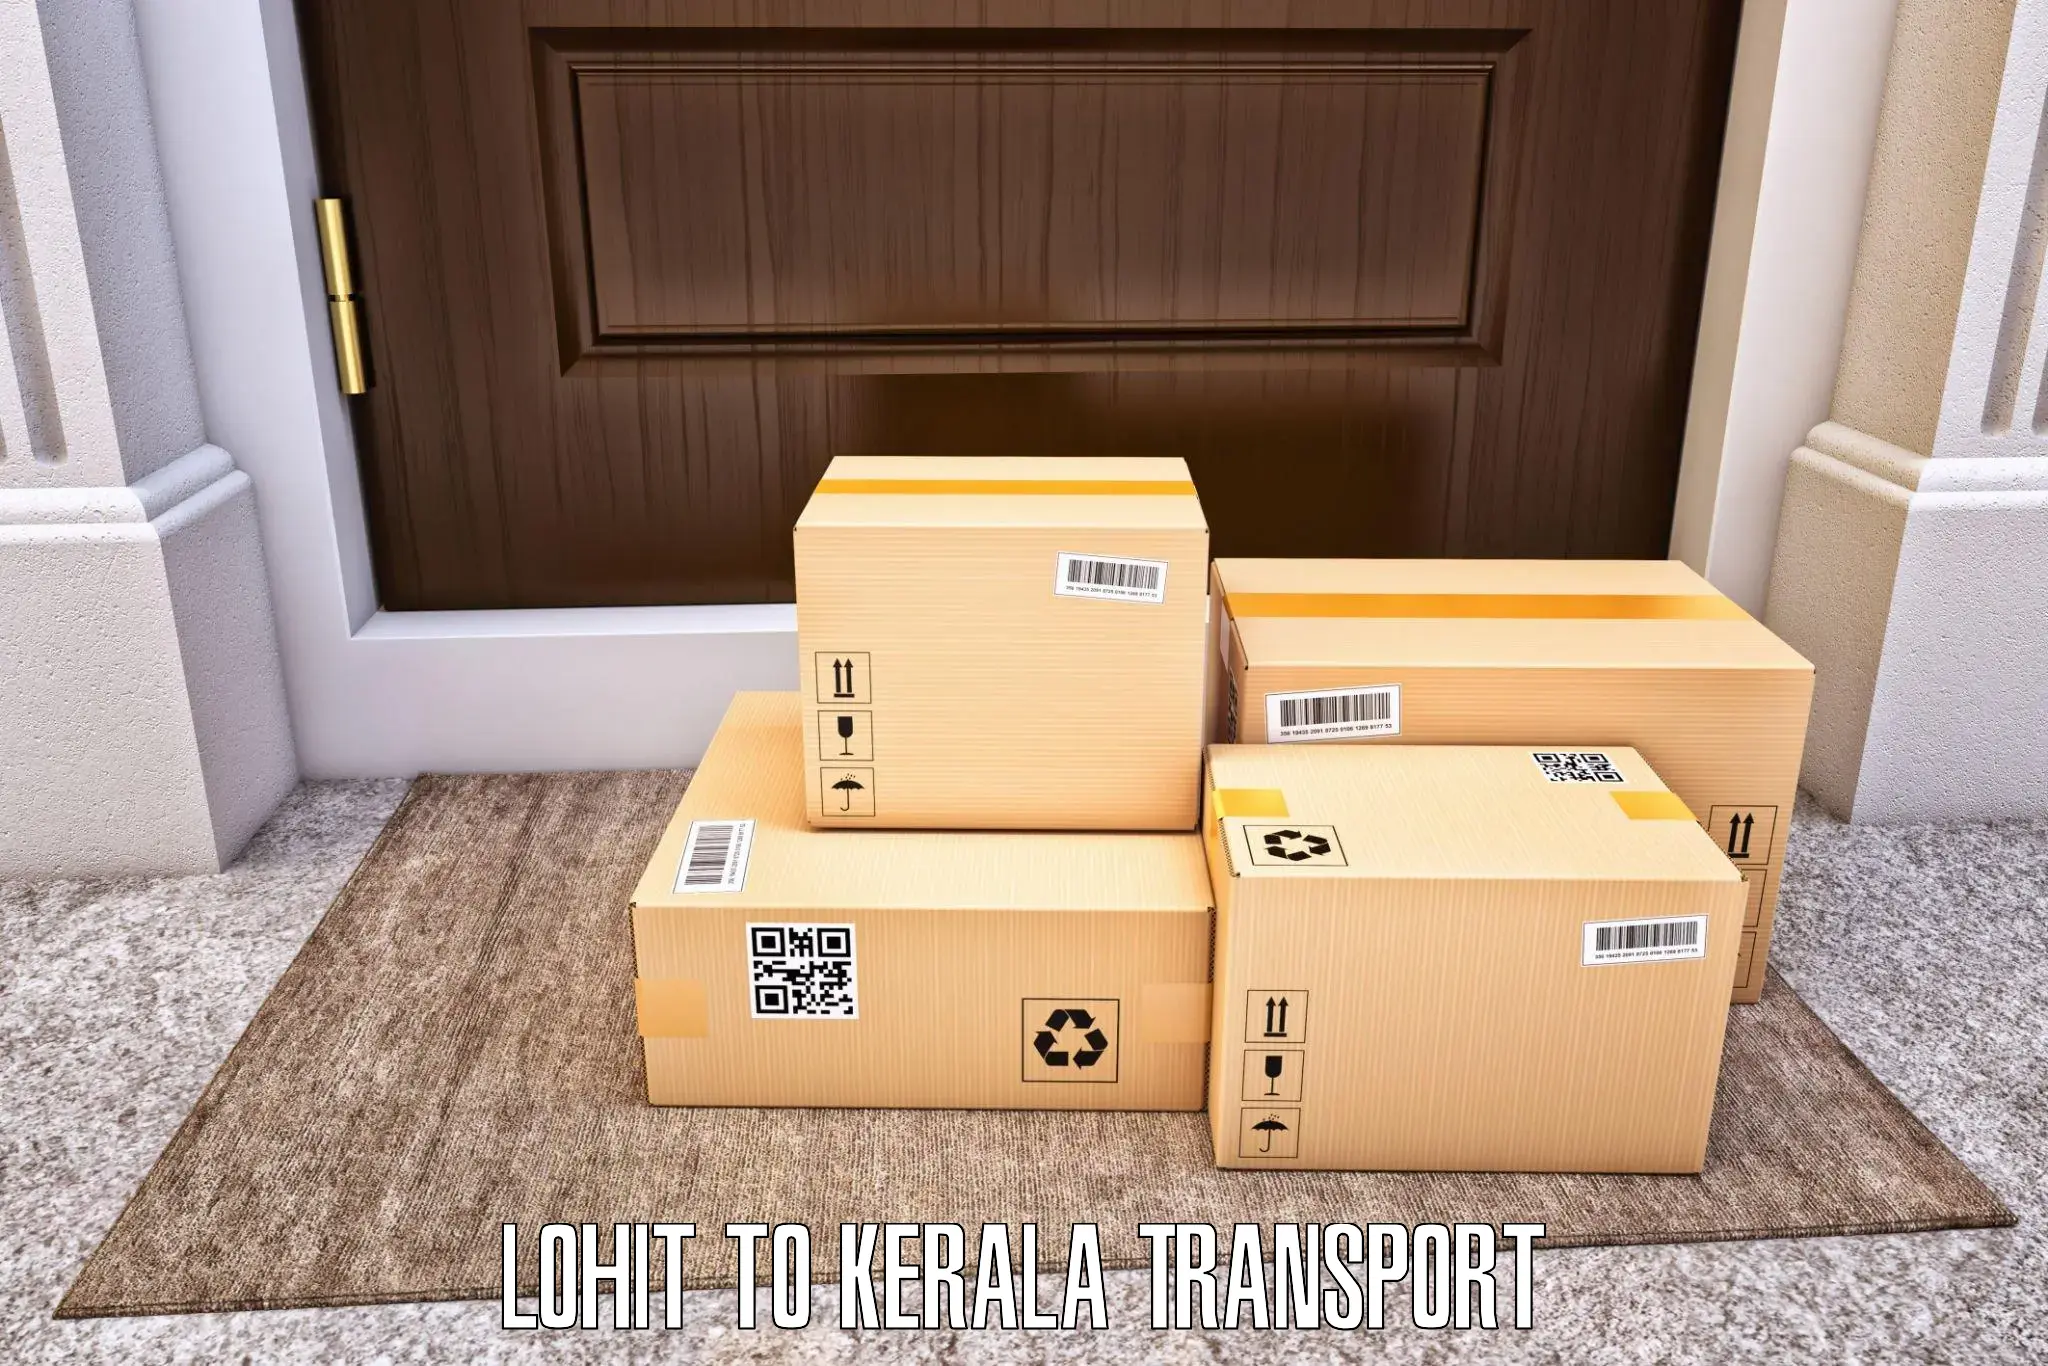 Commercial transport service Lohit to Kerala